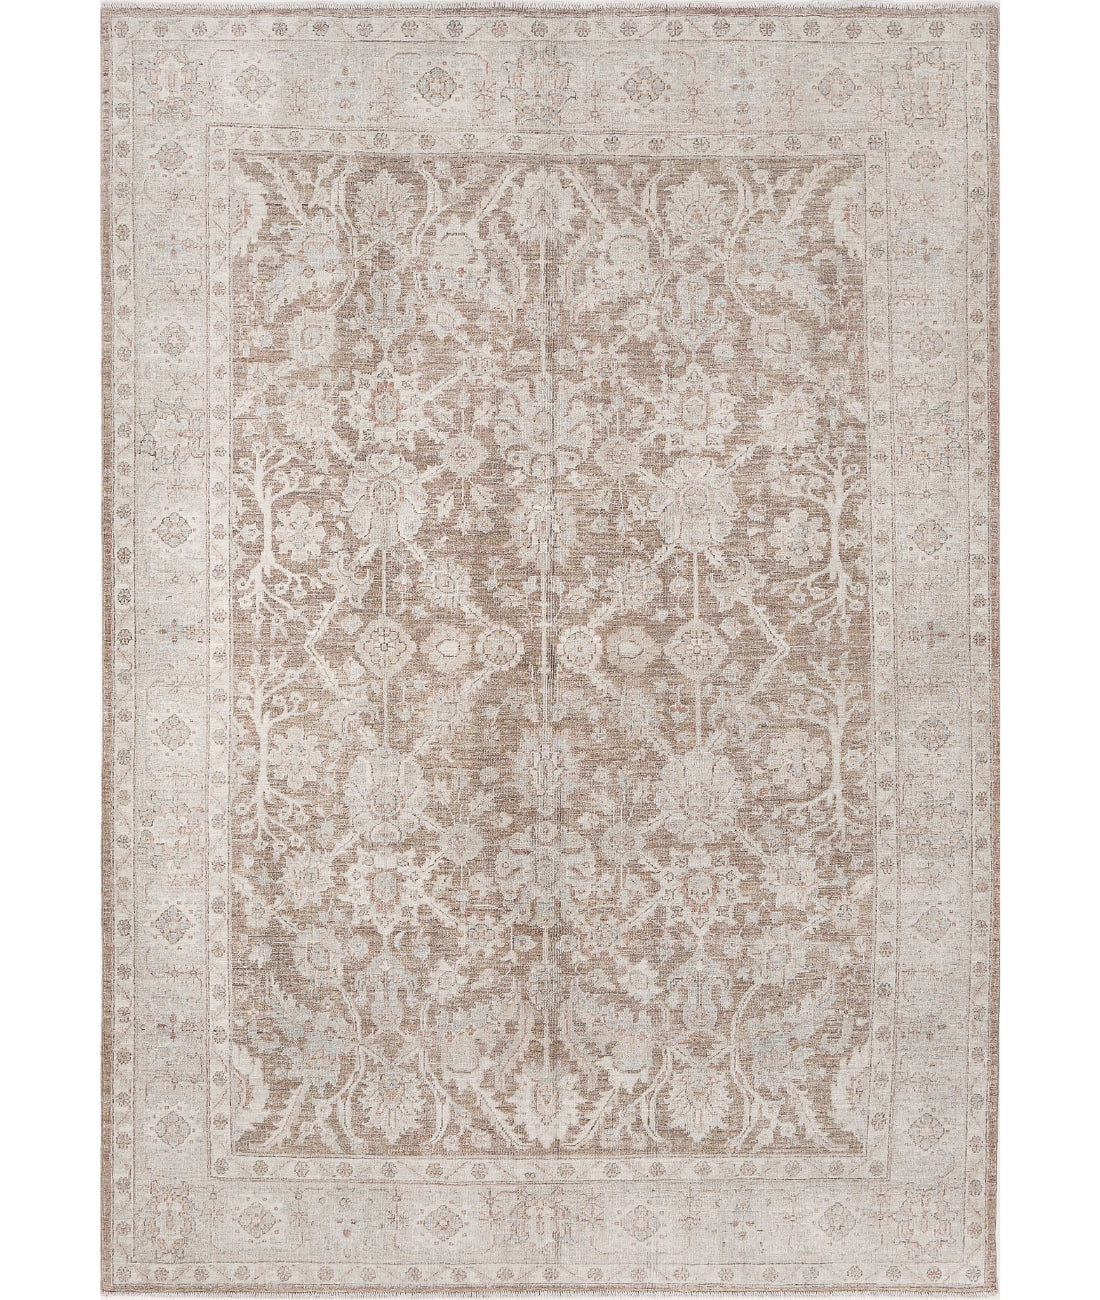 Hand Knotted Serenity Wool Rug - 6'2'' x 8'9'' 6'2'' x 8'9'' (185 X 263) / Brown / Ivory